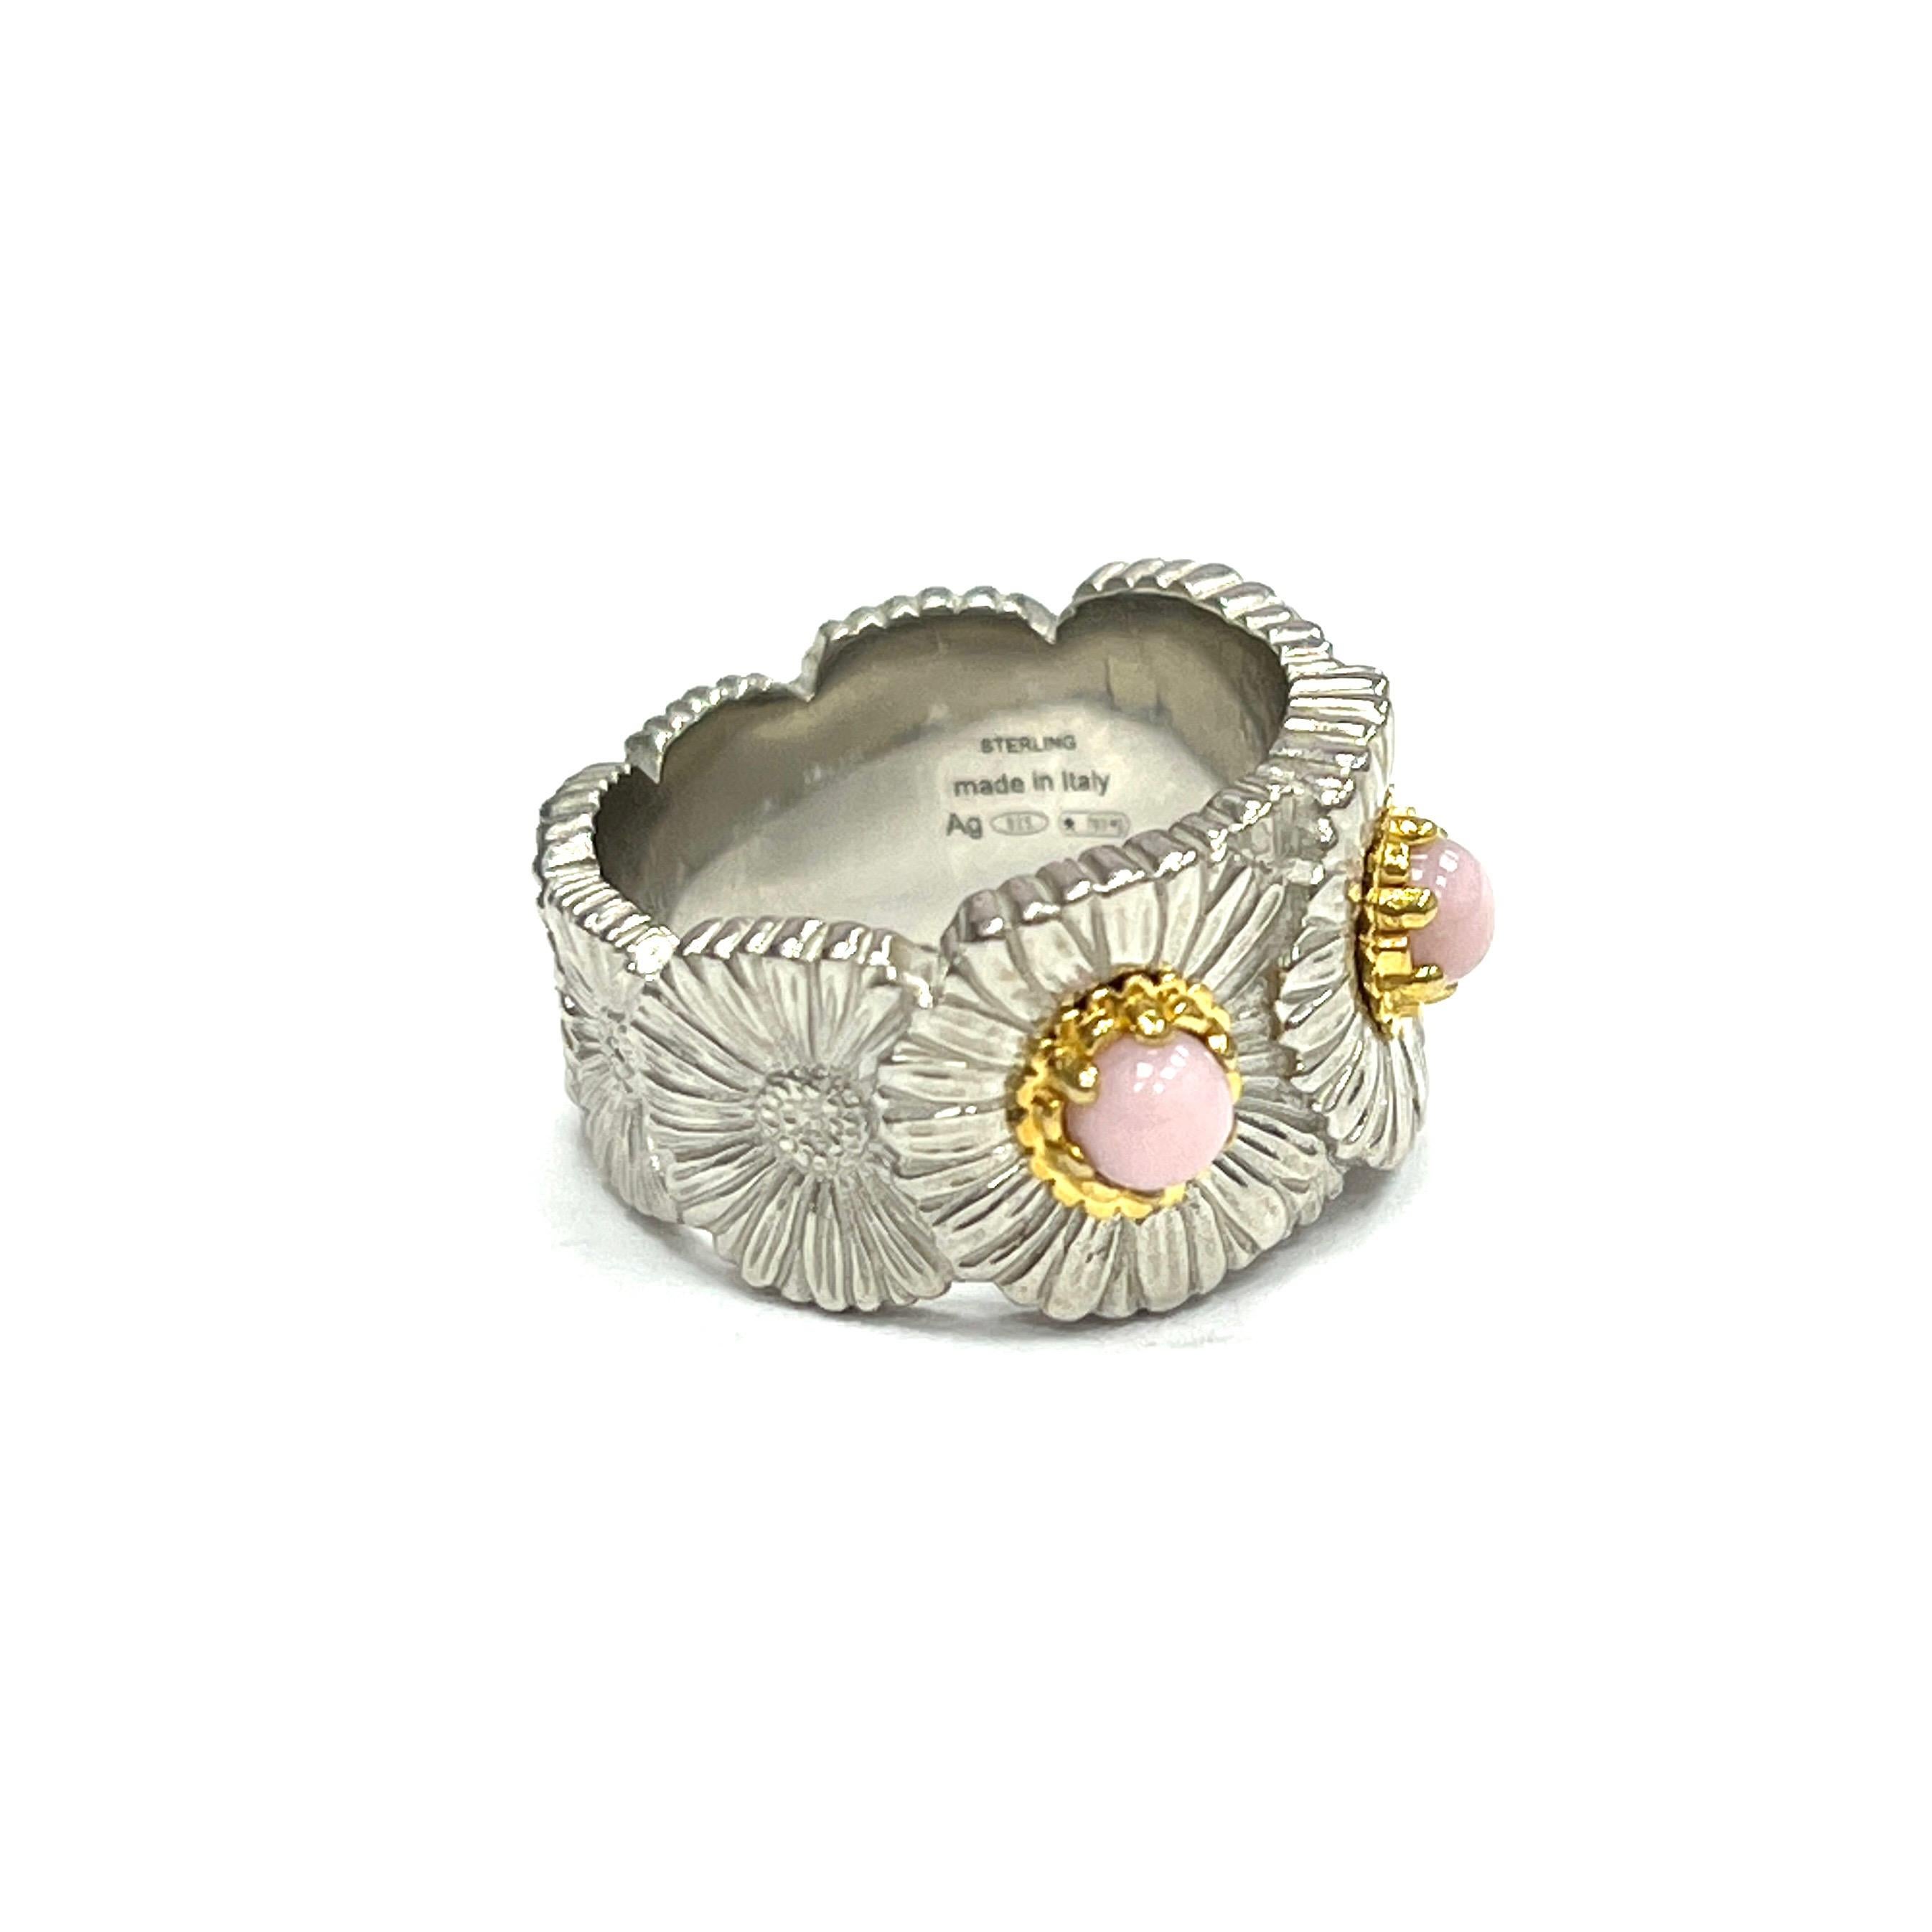 Buccellati Blossoms Daisy Pink Opal Sterling Silver Ring, Italian

Daisy flowers made of sterling silver with cabochon pink opal of approximately 0.50 carat; marked Buccellati, Made in Italy, Sterling, 925, 55

Size: 7 US; 55 Europe
Total weight: